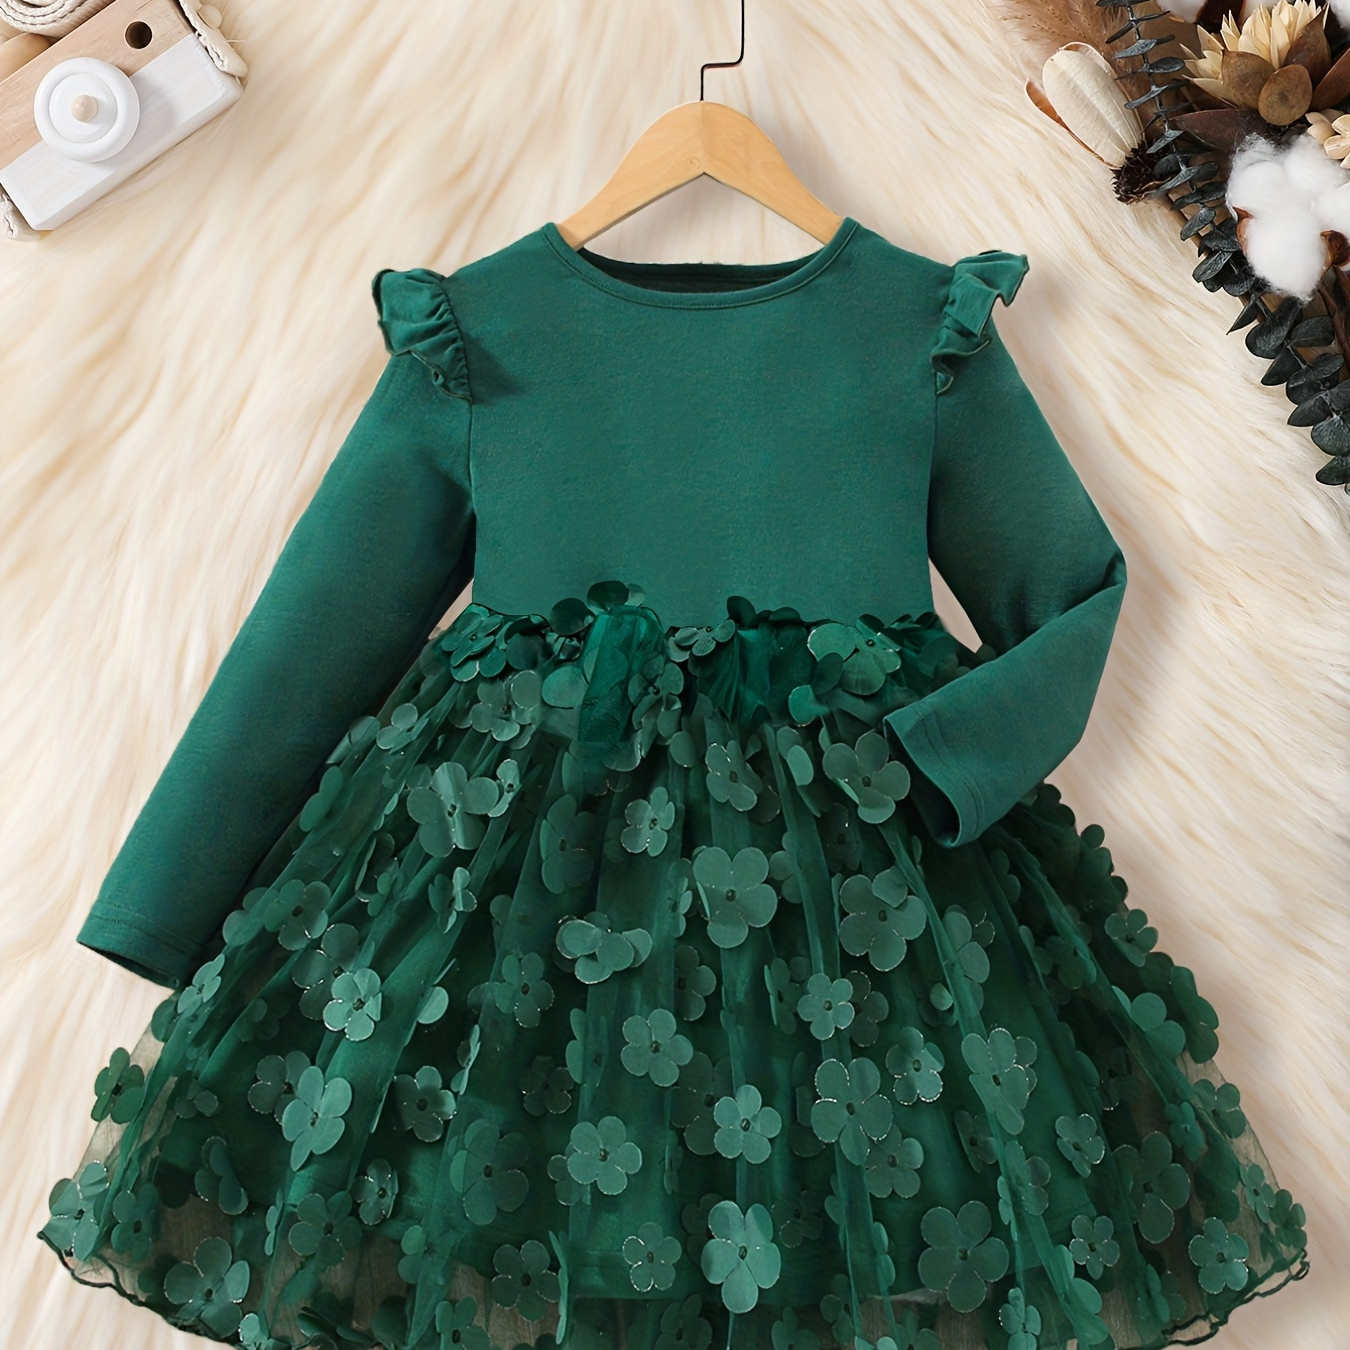 

Girls' Party Princess Tutu Dresses With Flower Appliques Long Sleeve A-line Casual Cute Dress